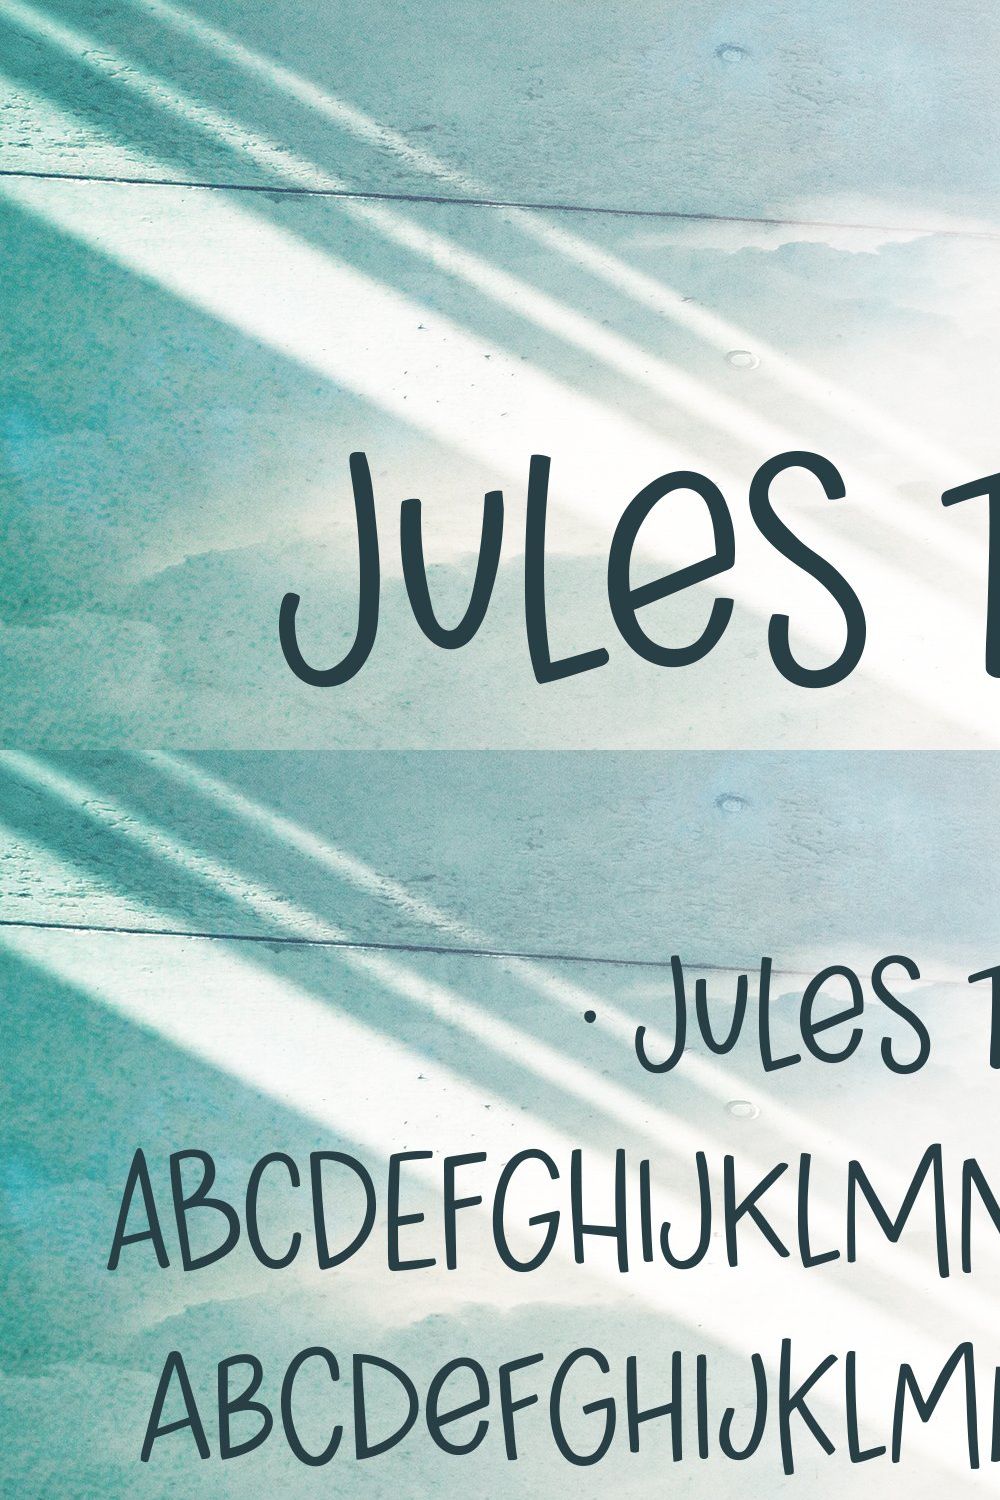 Jules Thicket, a wonky caps font pinterest preview image.